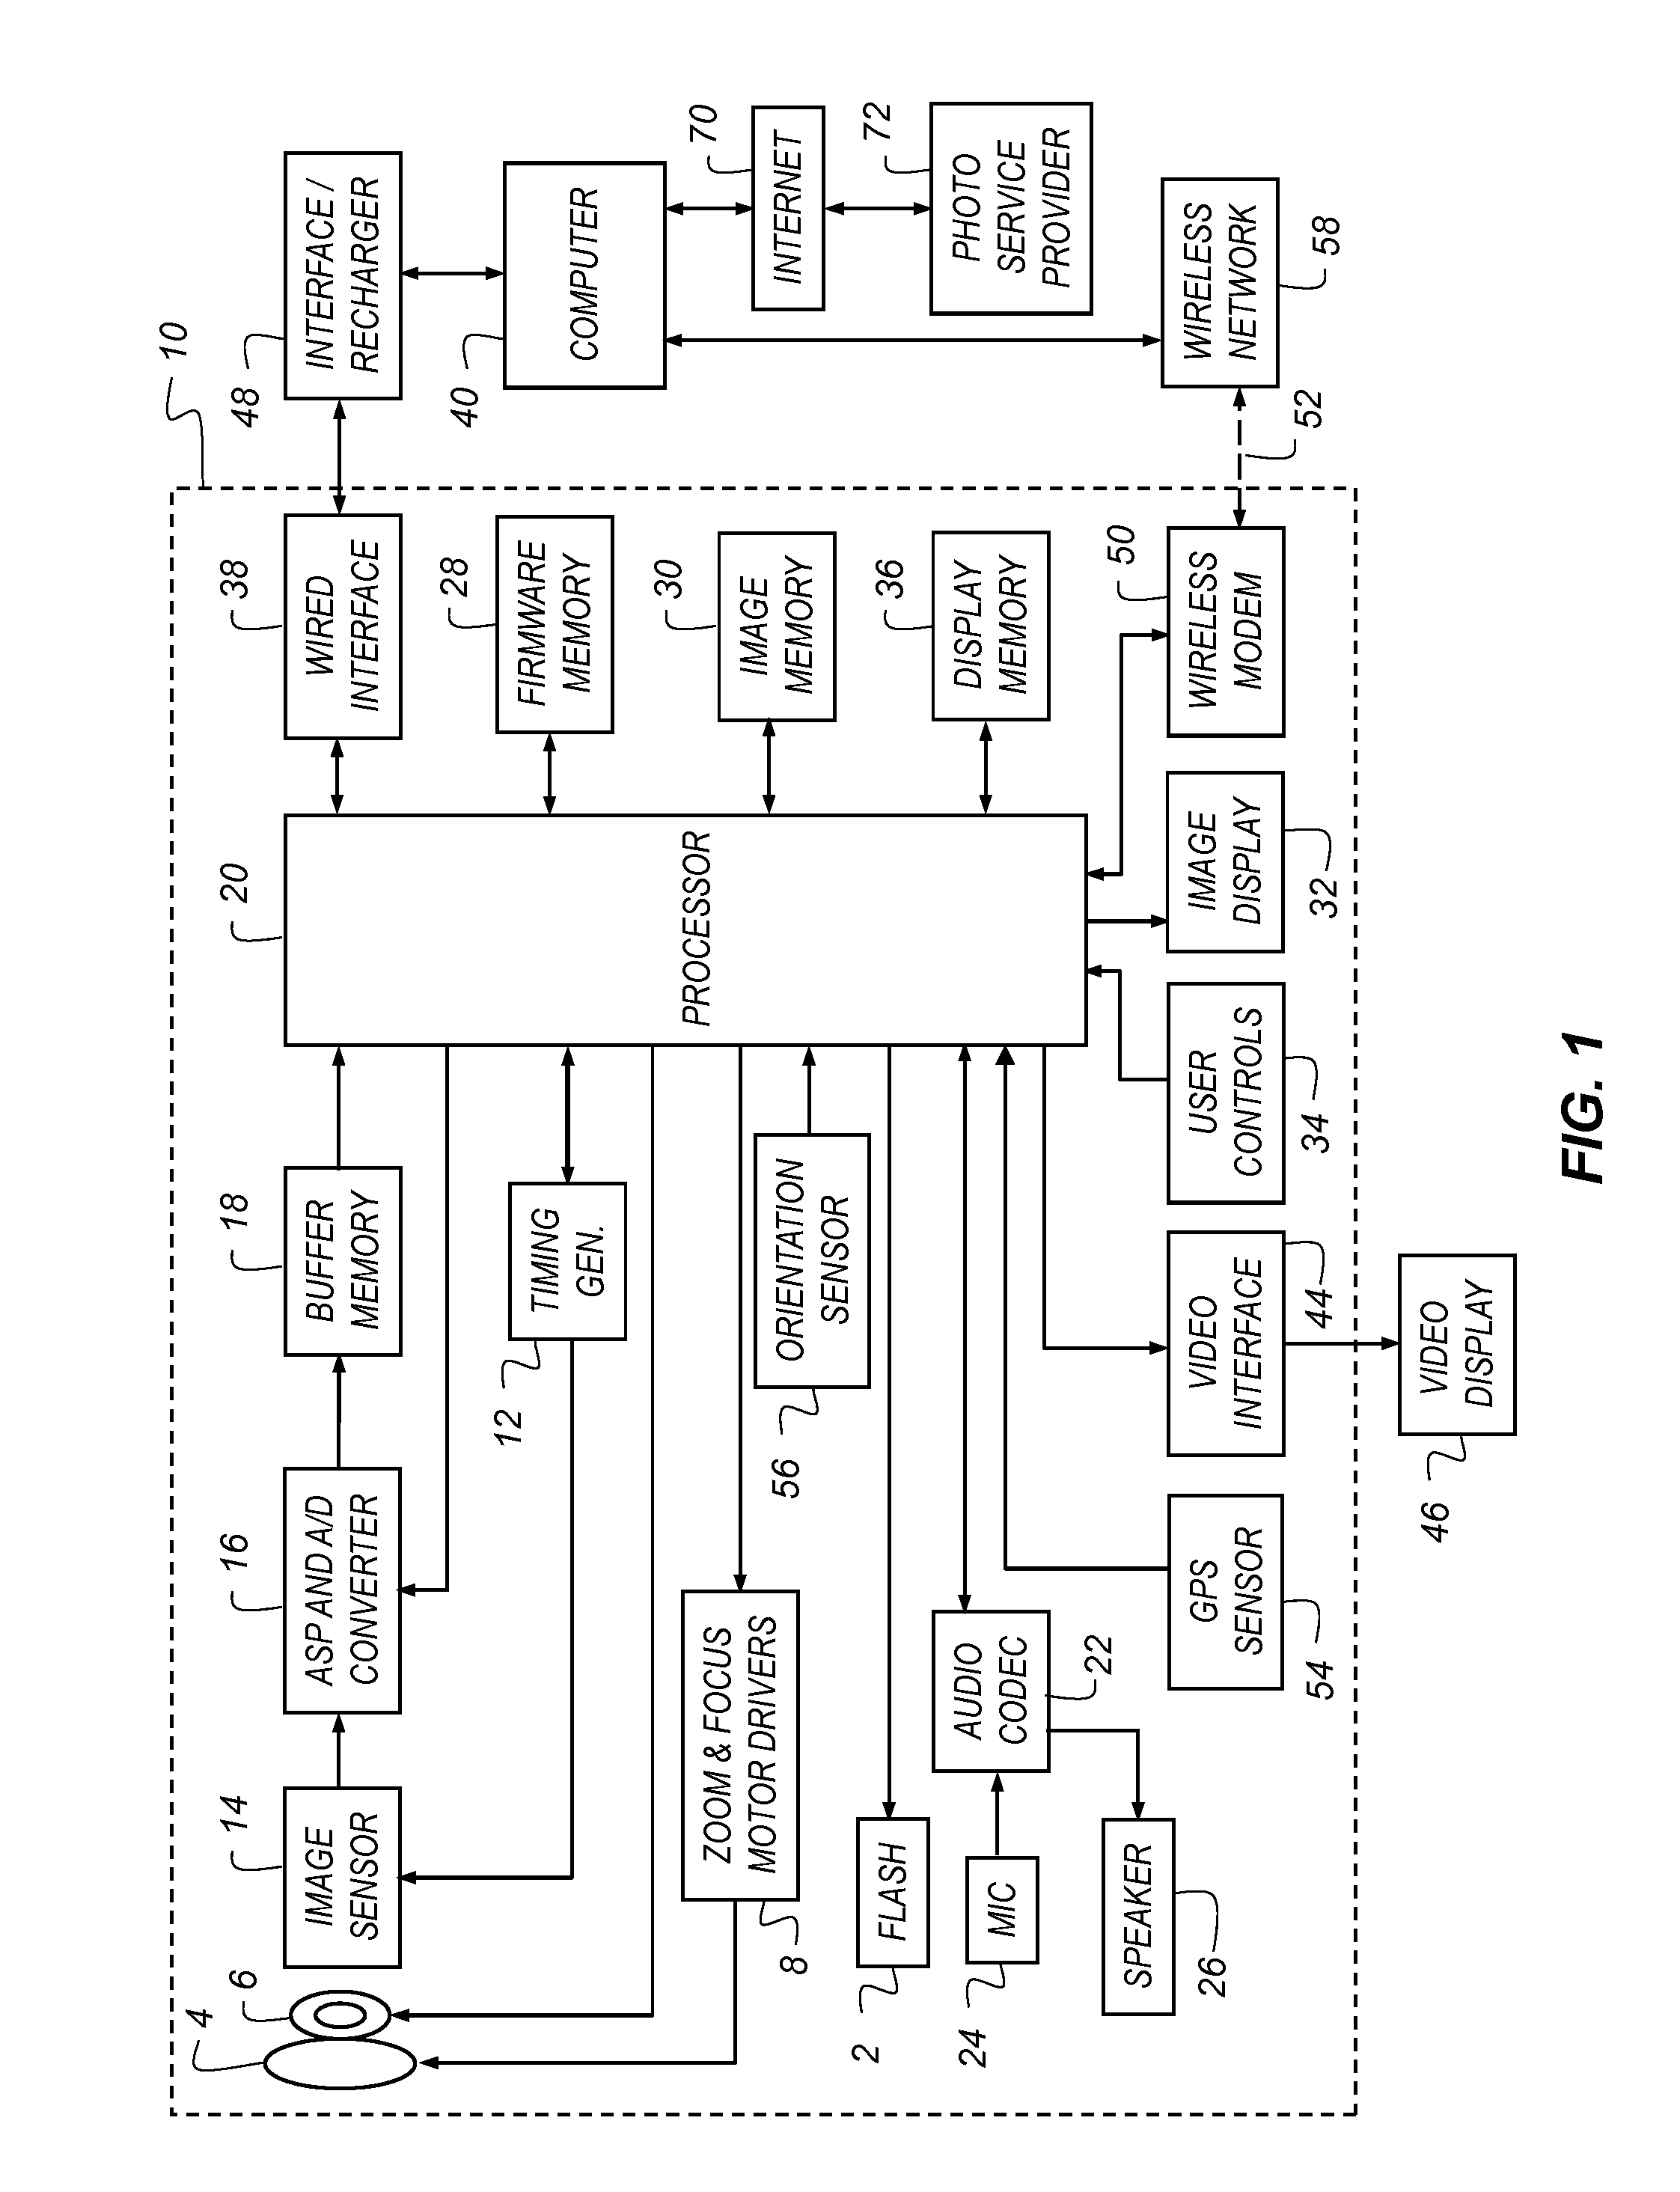 Camera having processing customized for identified persons